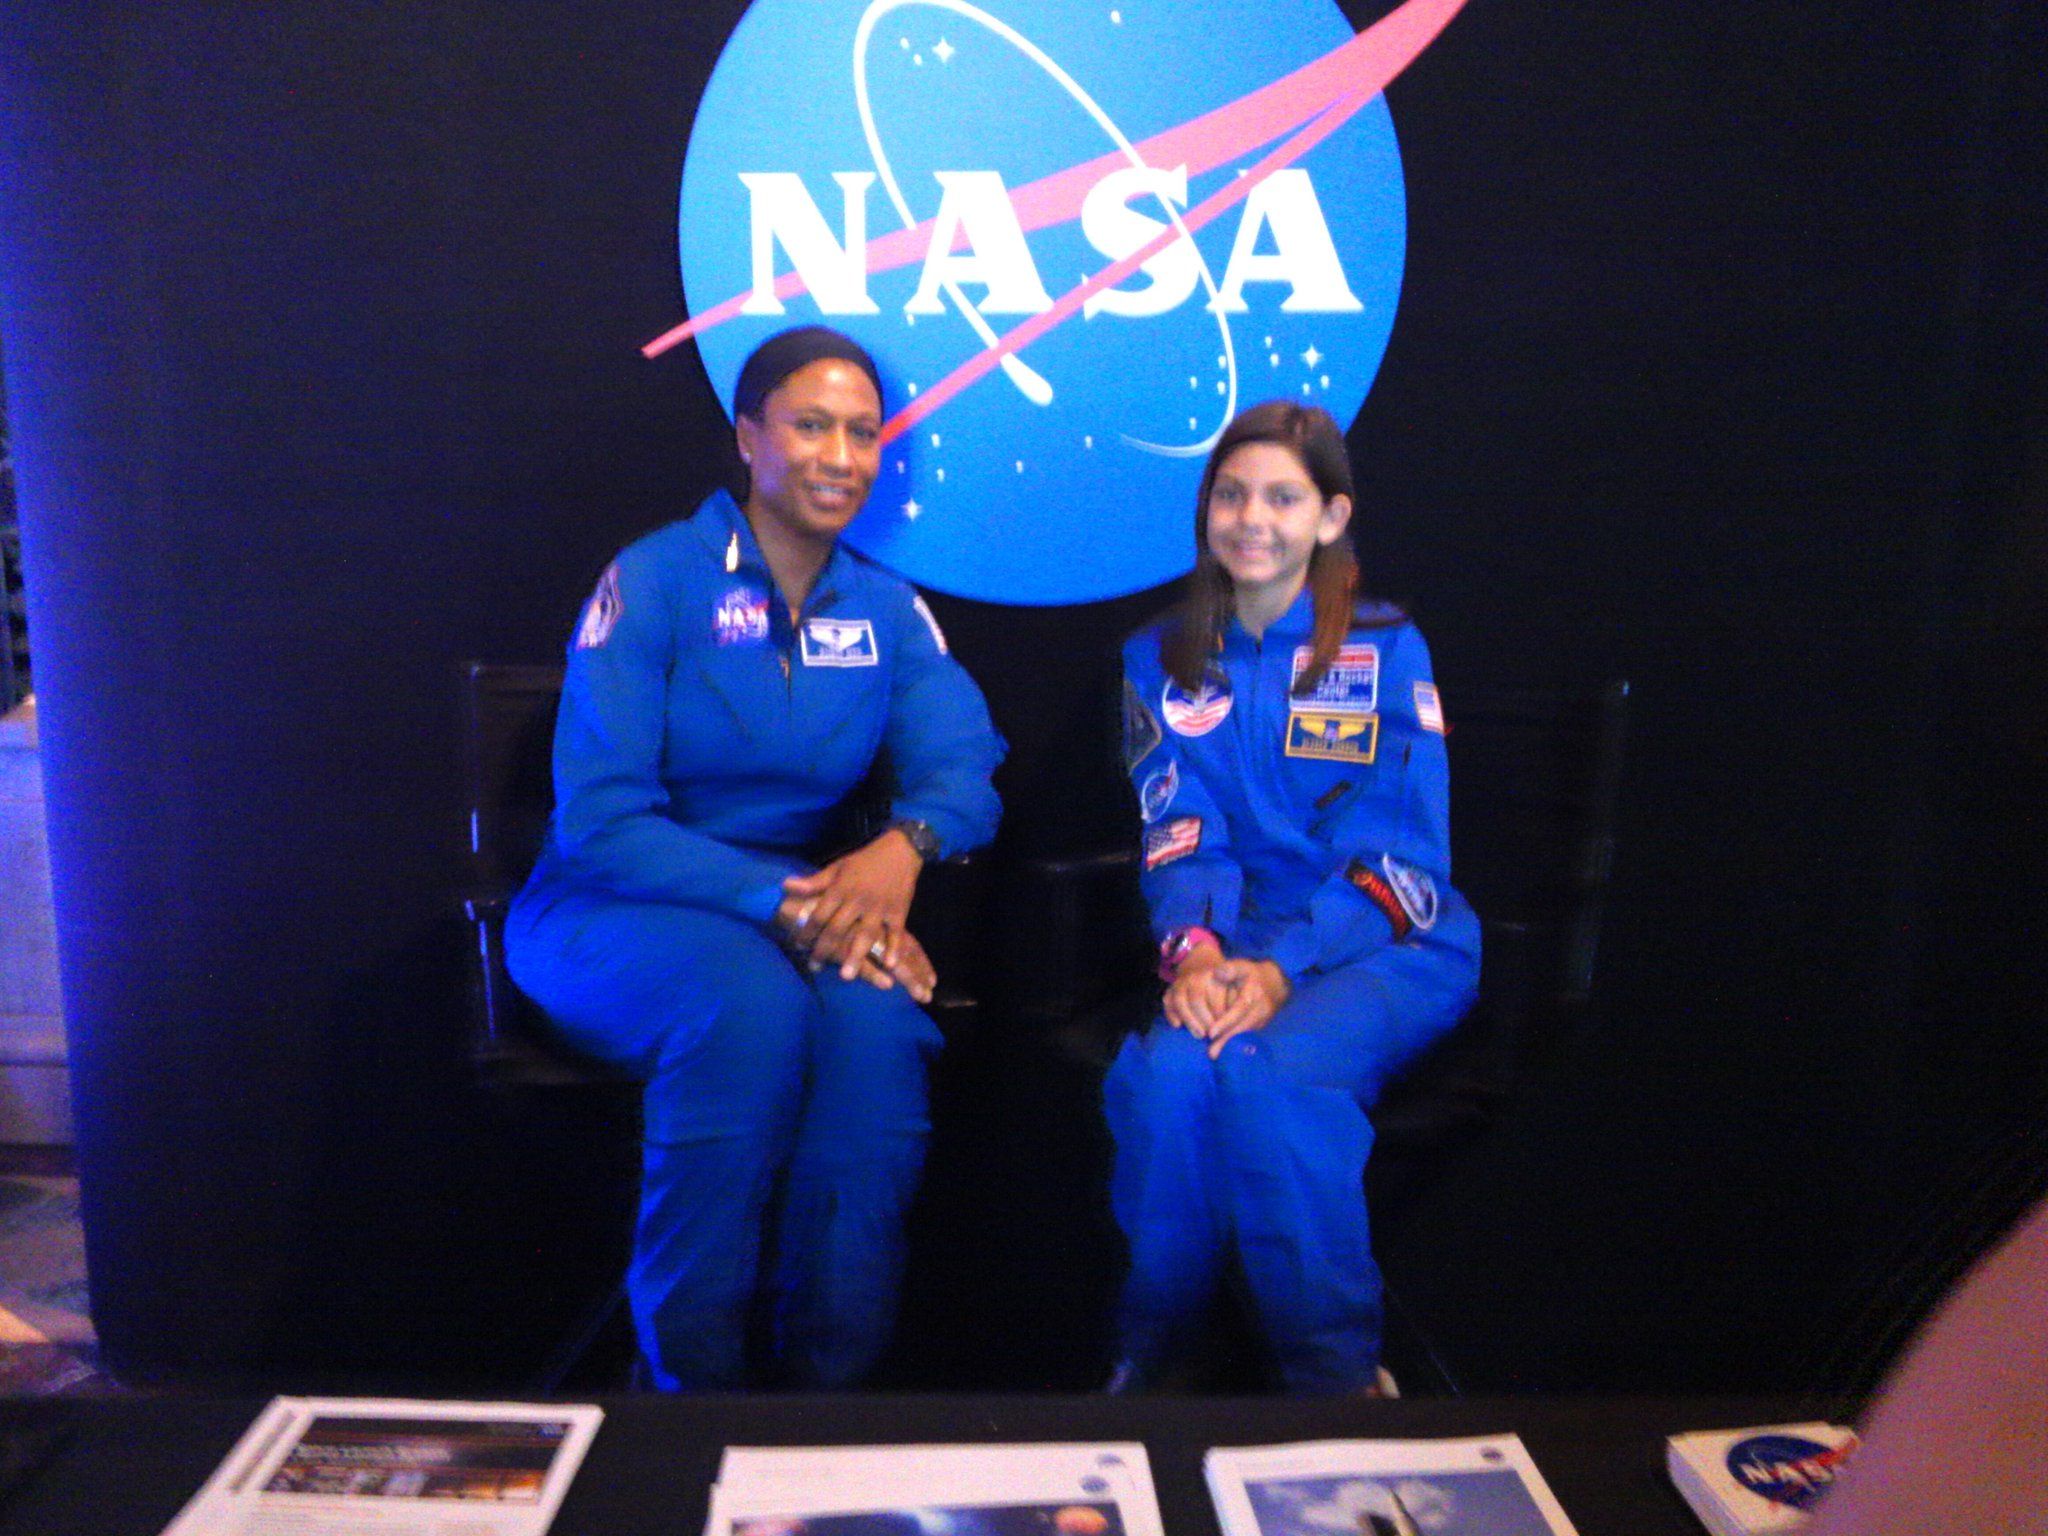 Alyssa Carson NASA today at the LA State Capital with Astronaut Jeanette Epps